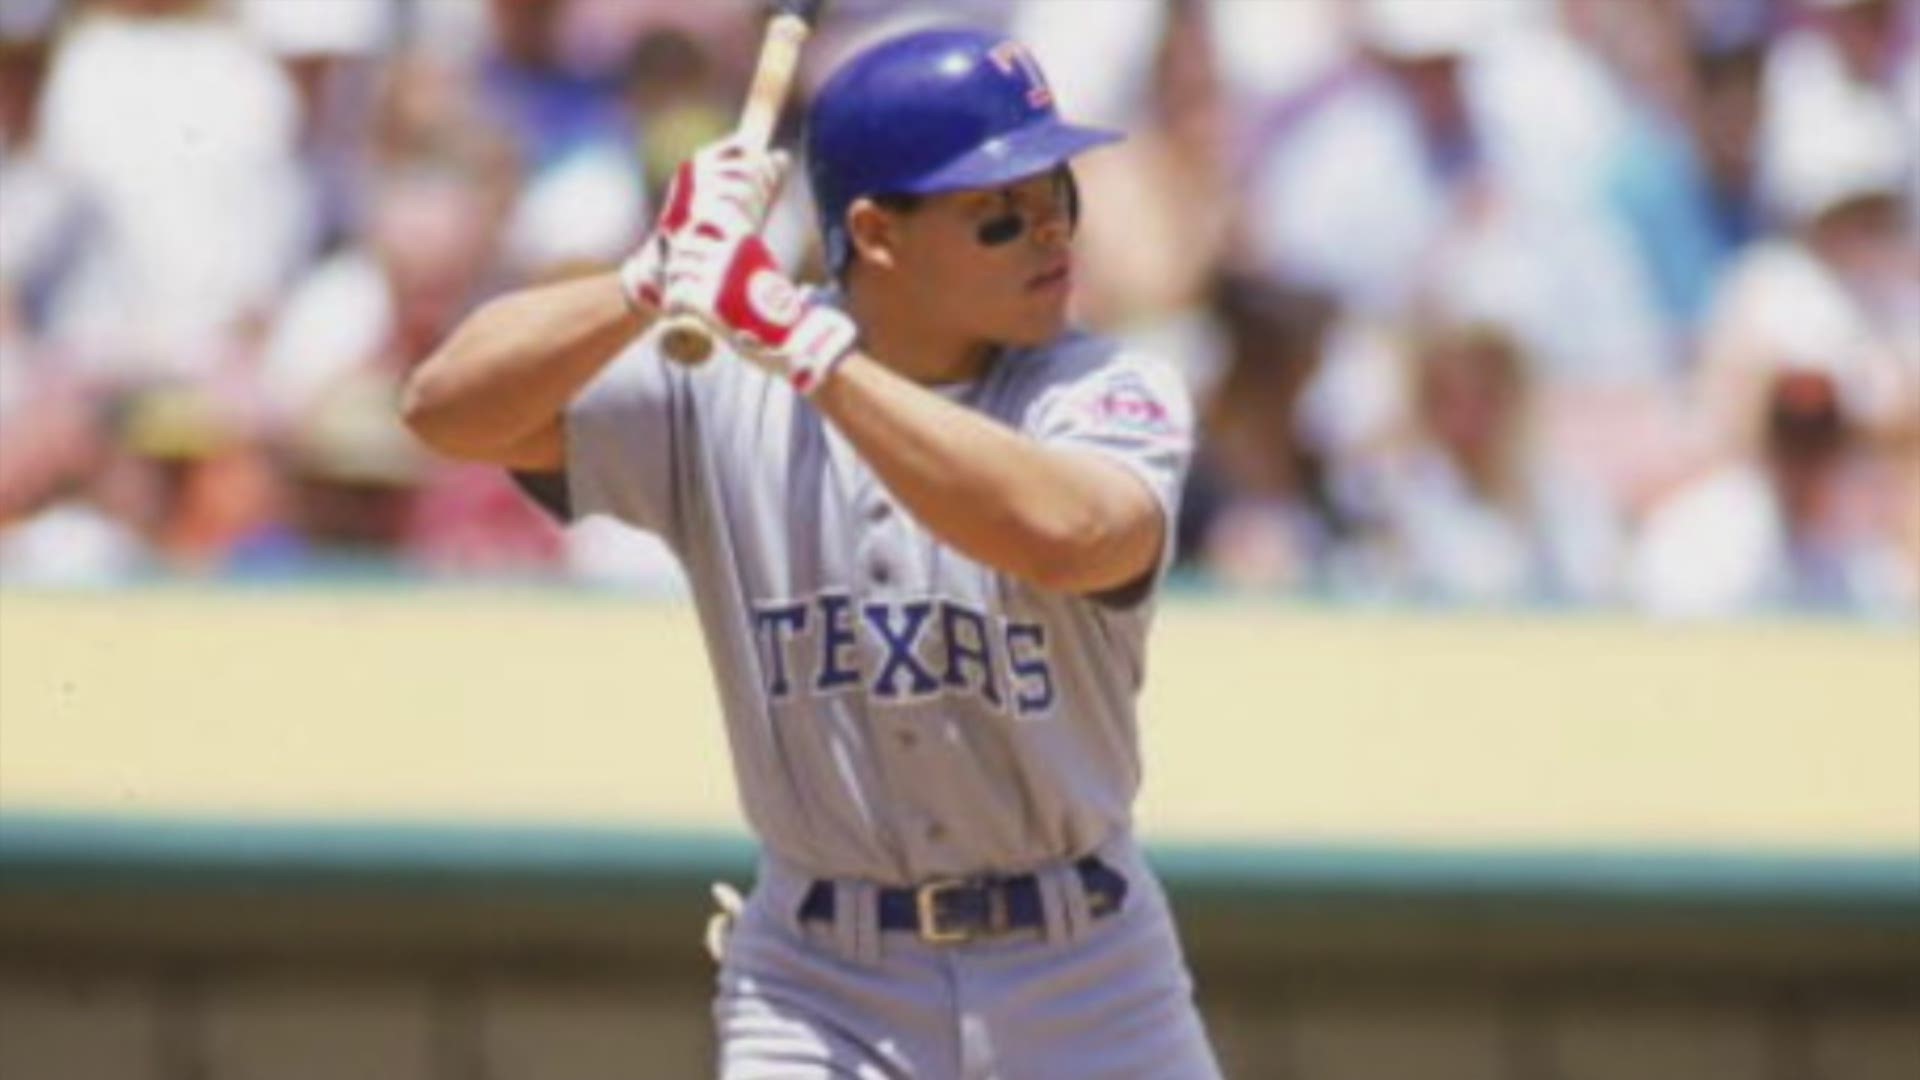 MLB: Is Ivan Rodriguez the Best Catcher of All Time?